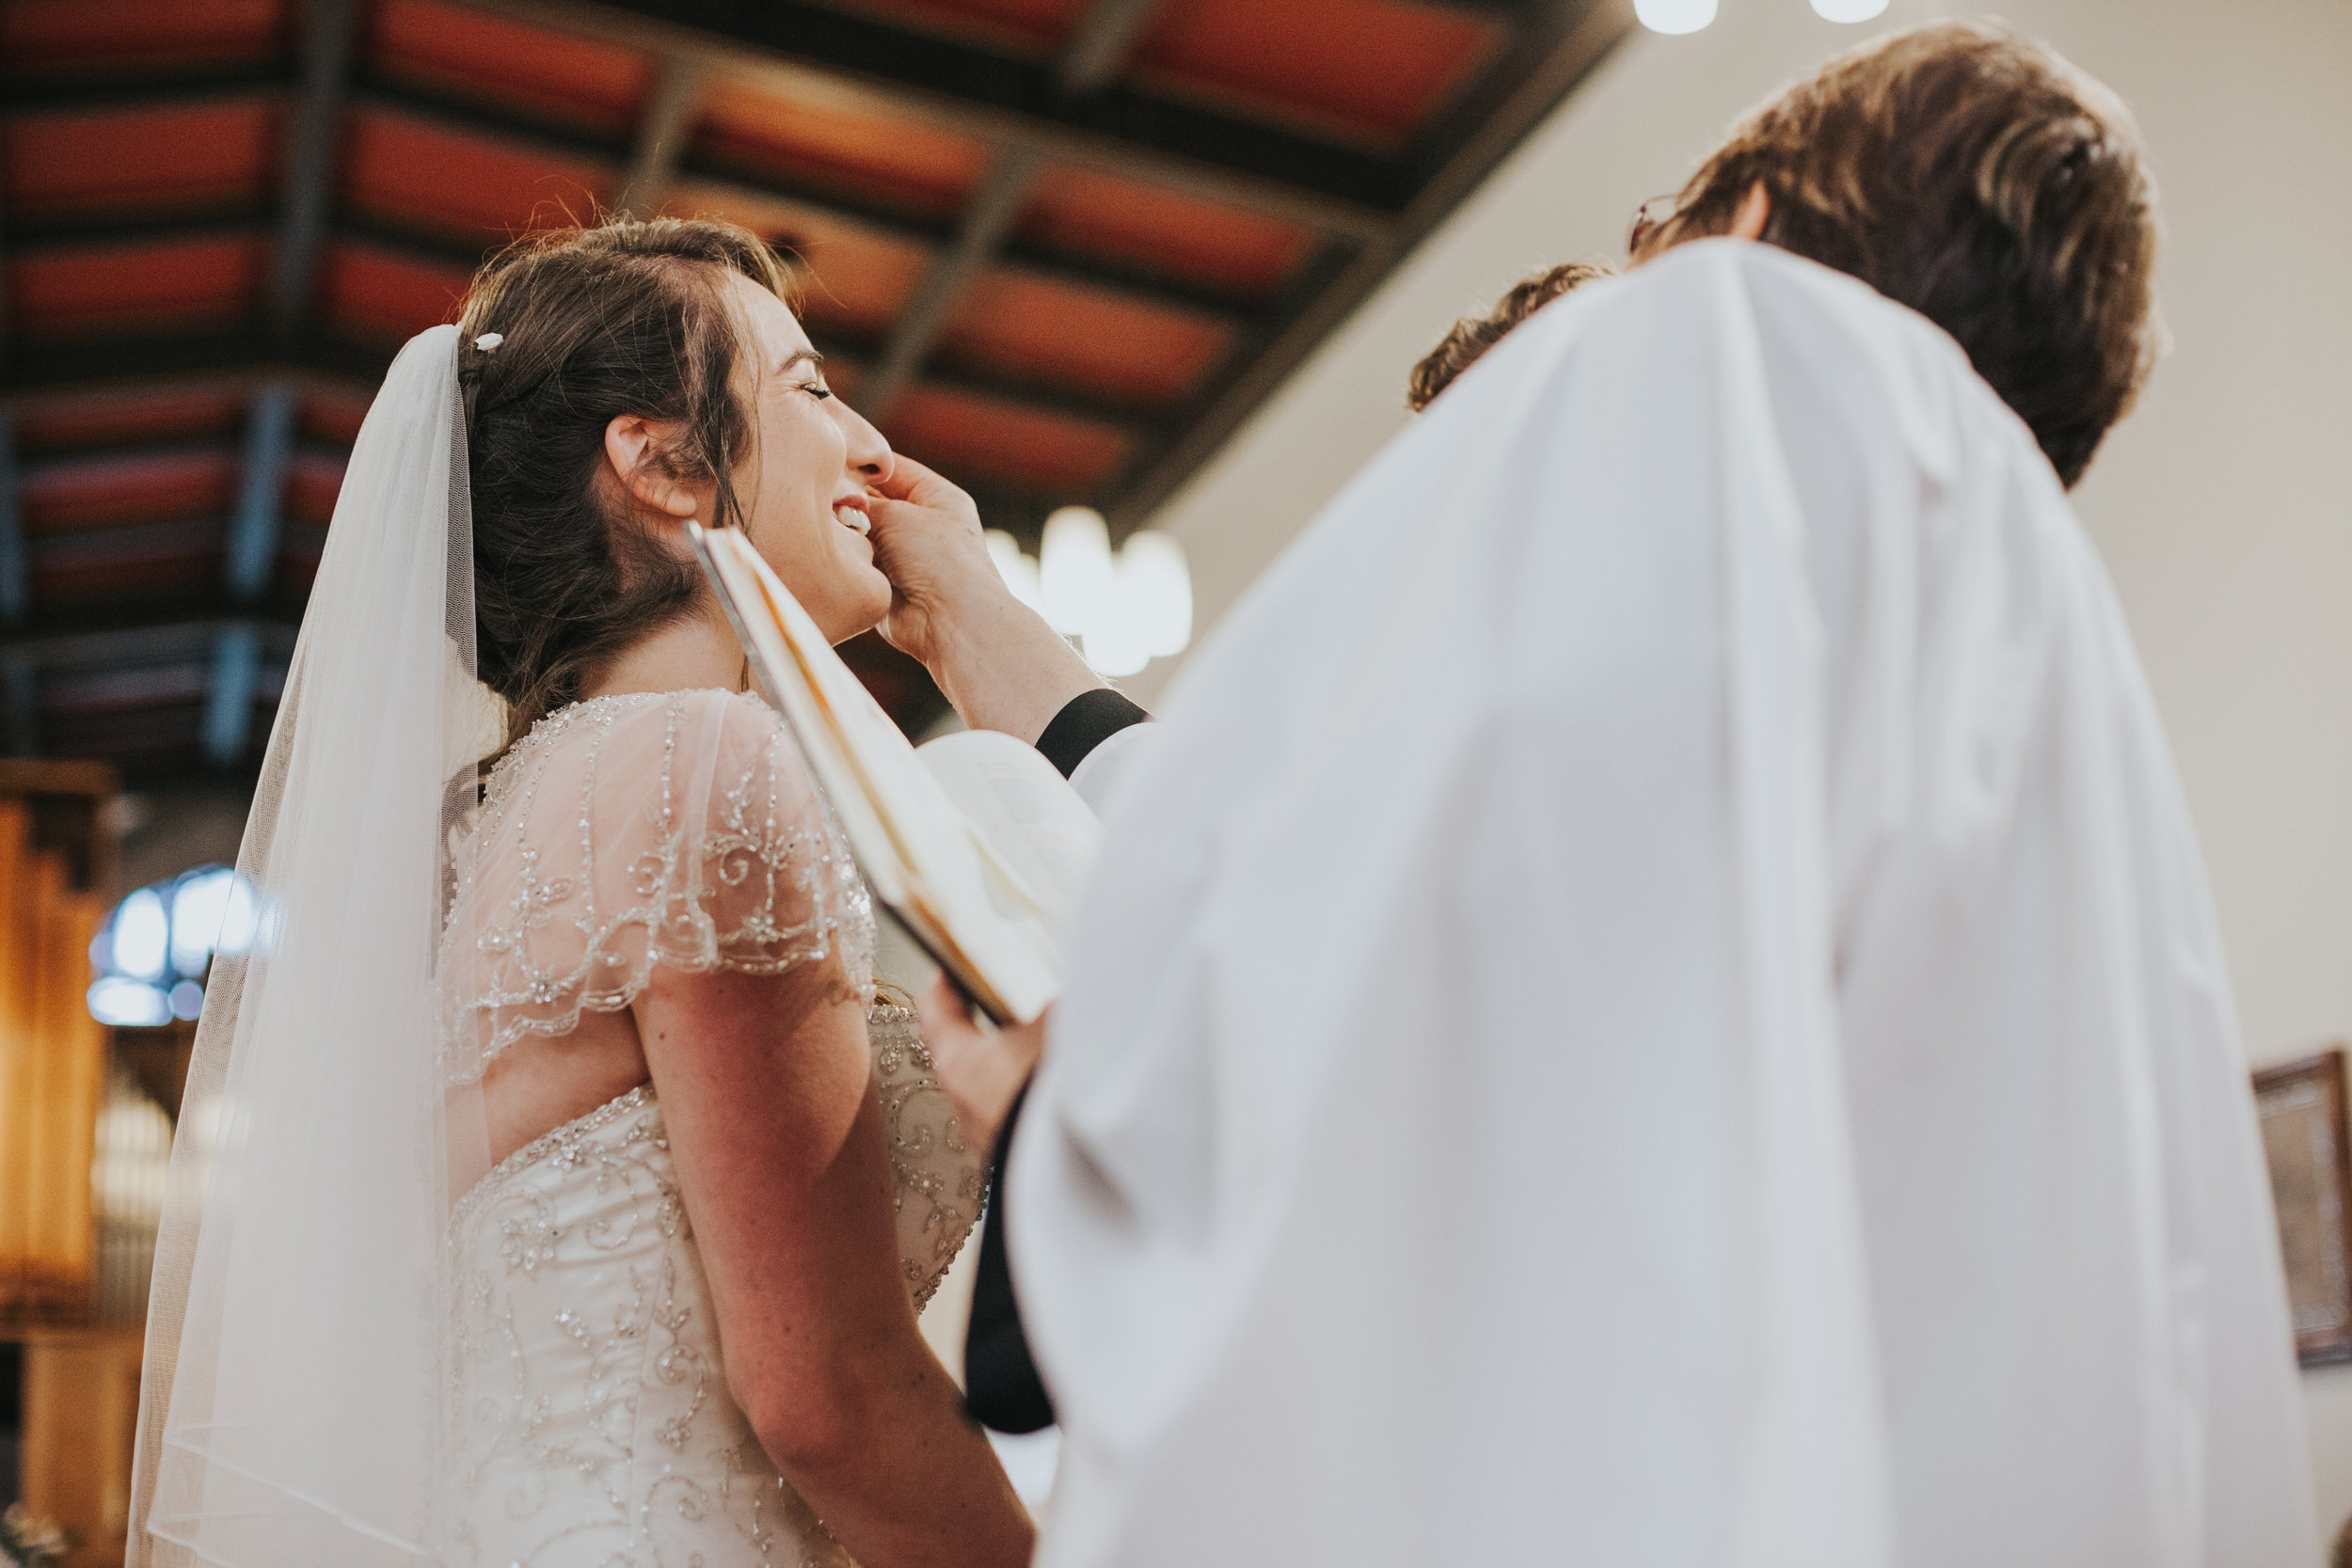  Female vicar wipes tears from brides face, while bride laughs. 